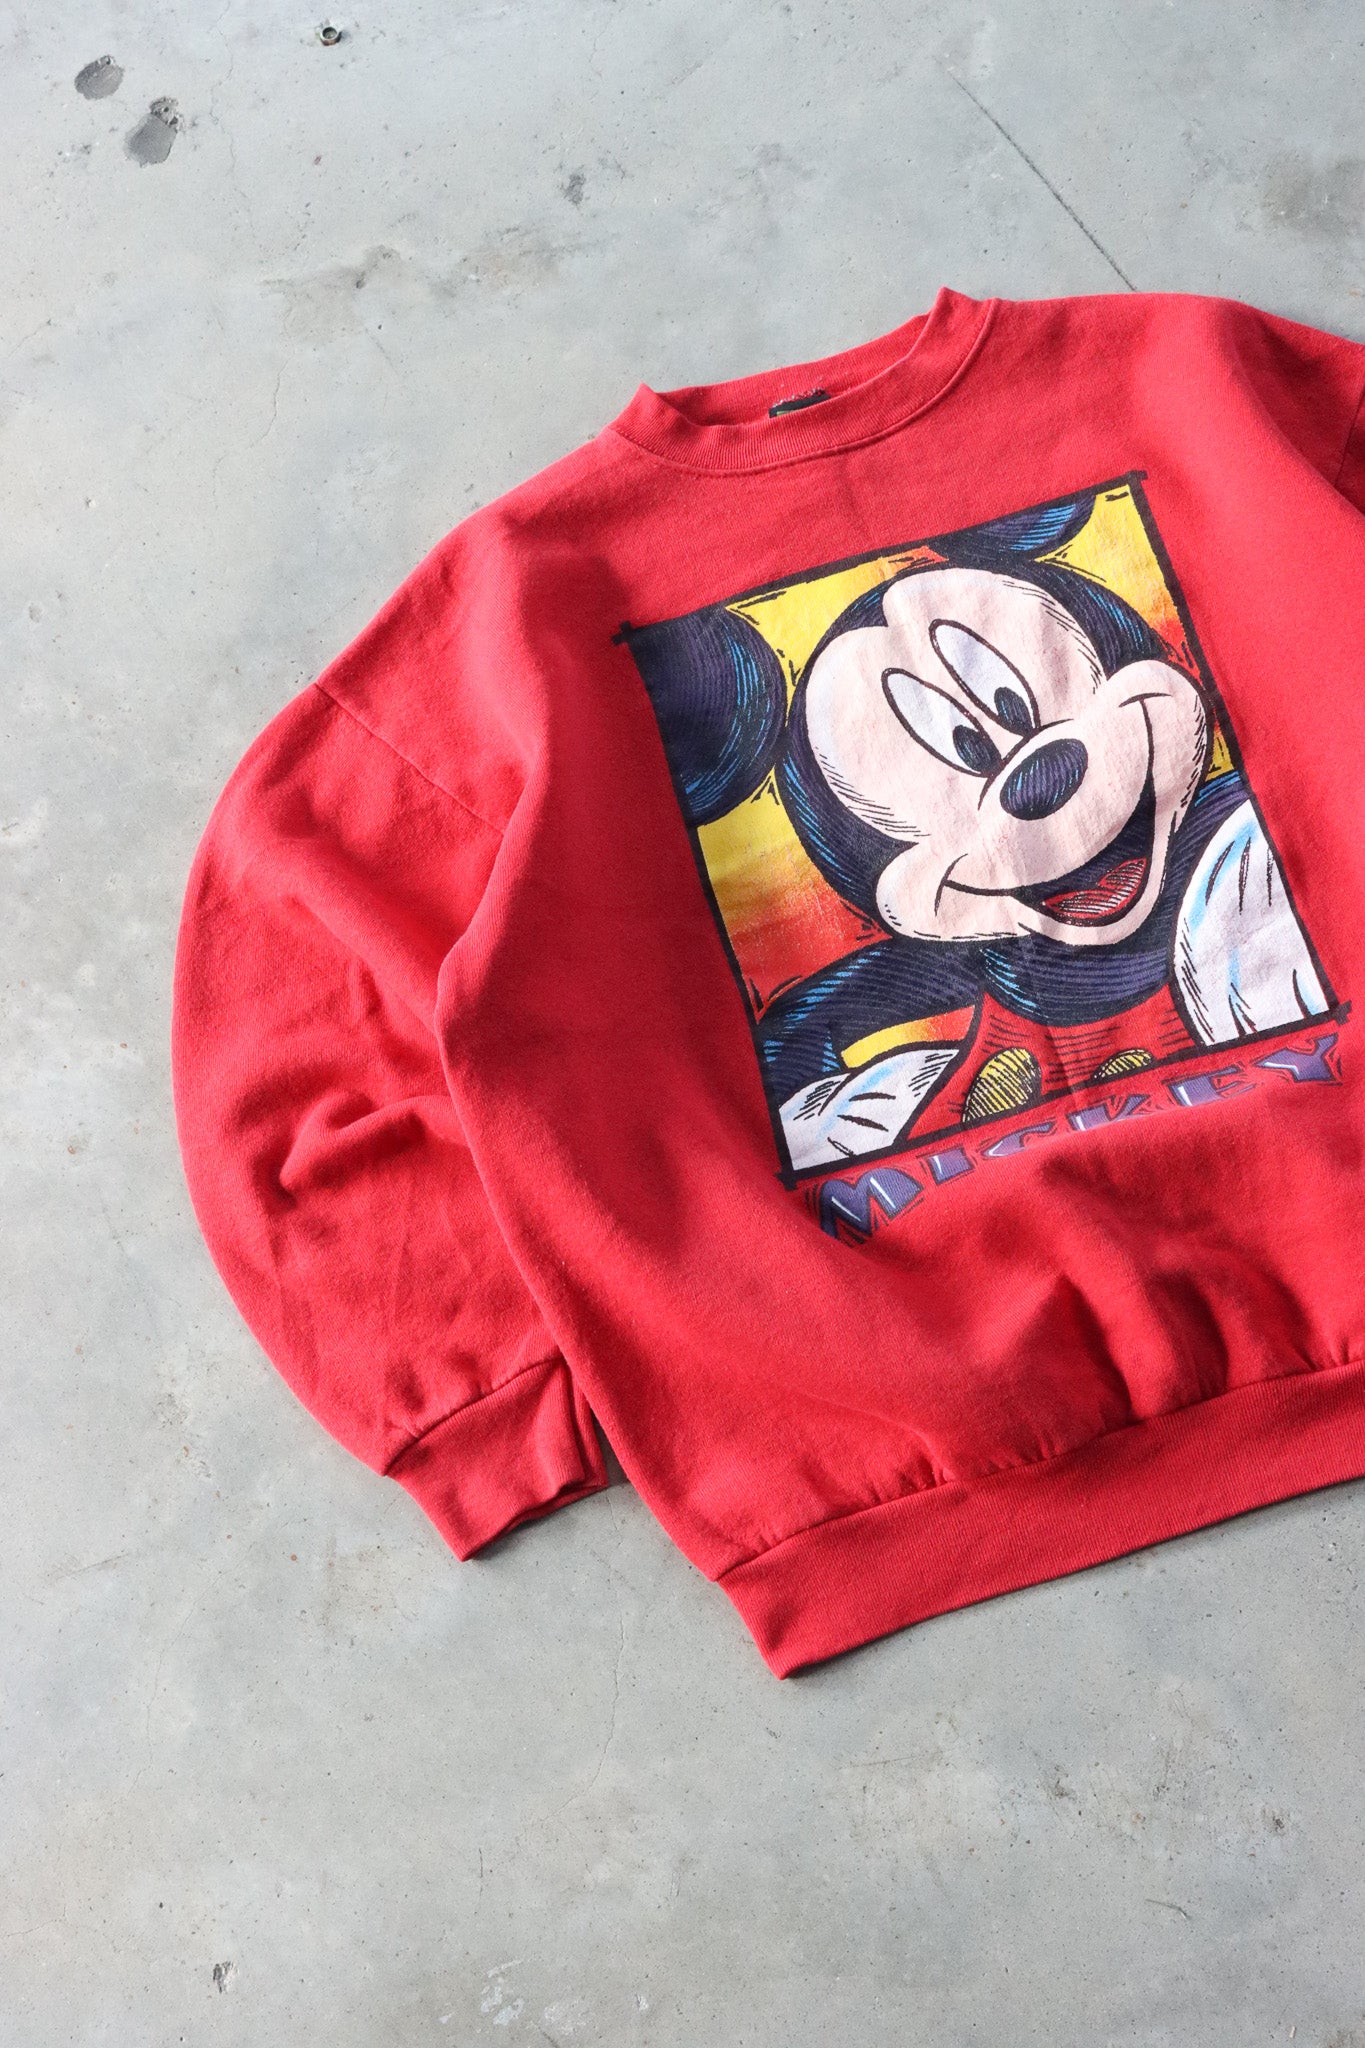 Vintage Mickey Mouse Sweater Large